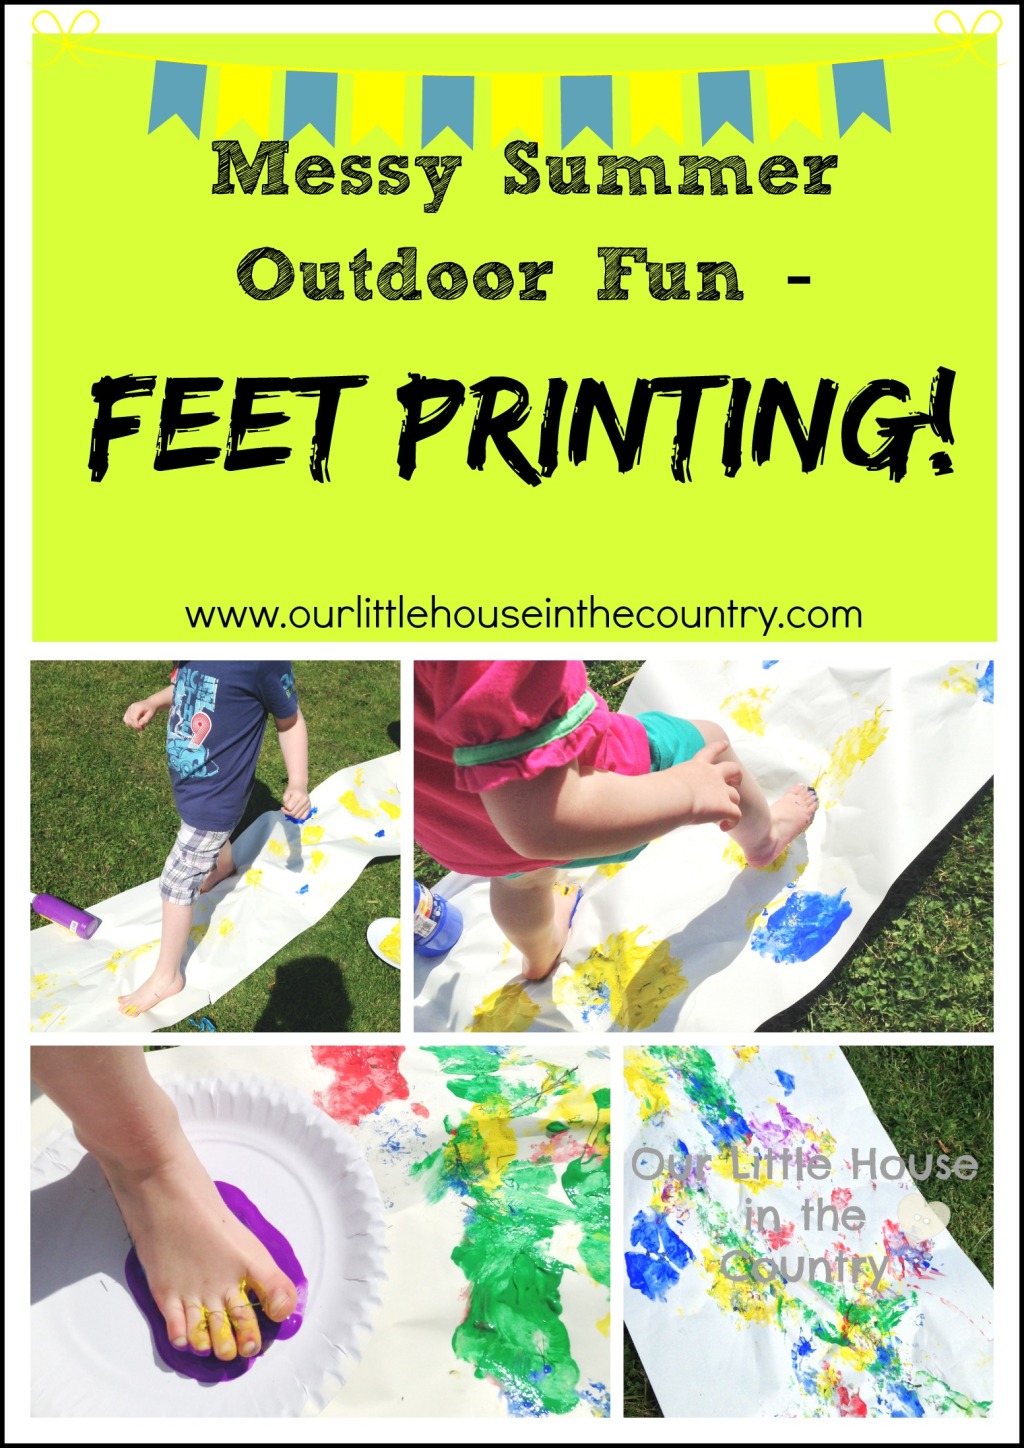 Feet Painting or Printing- Outdoor Messy Summer Fun for Kids!